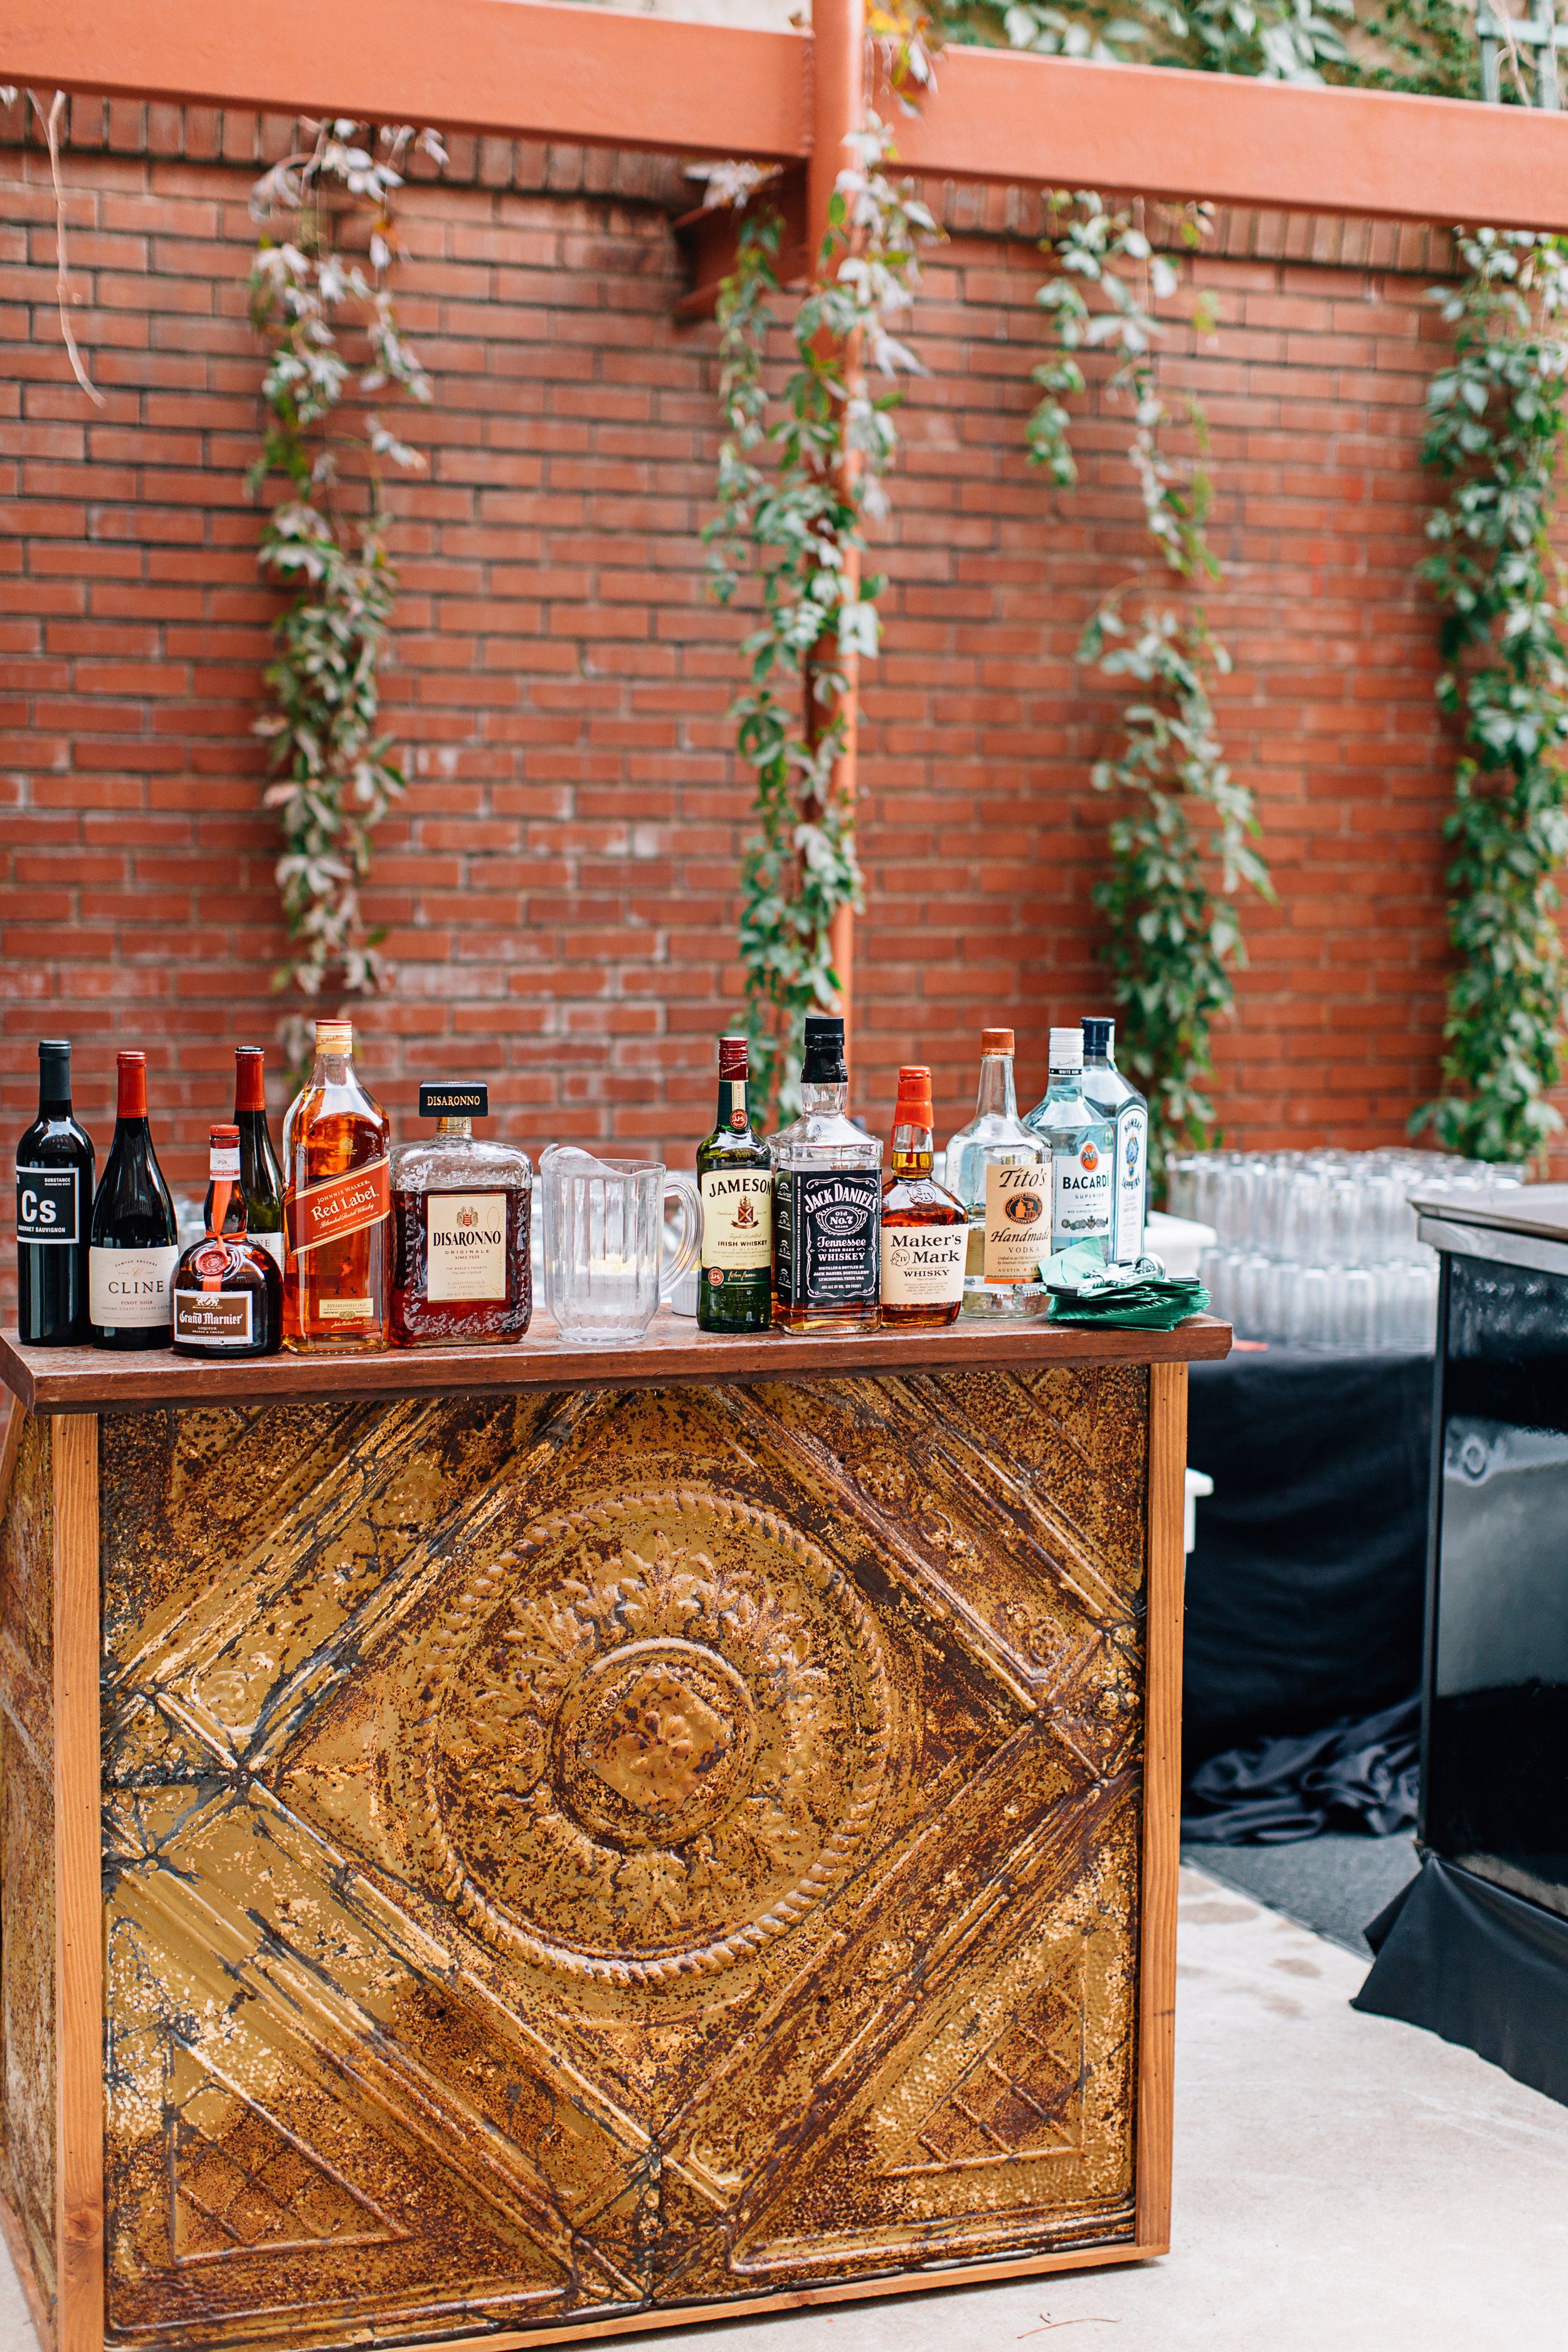 Outdoor bar set up trailing vines on brick wall